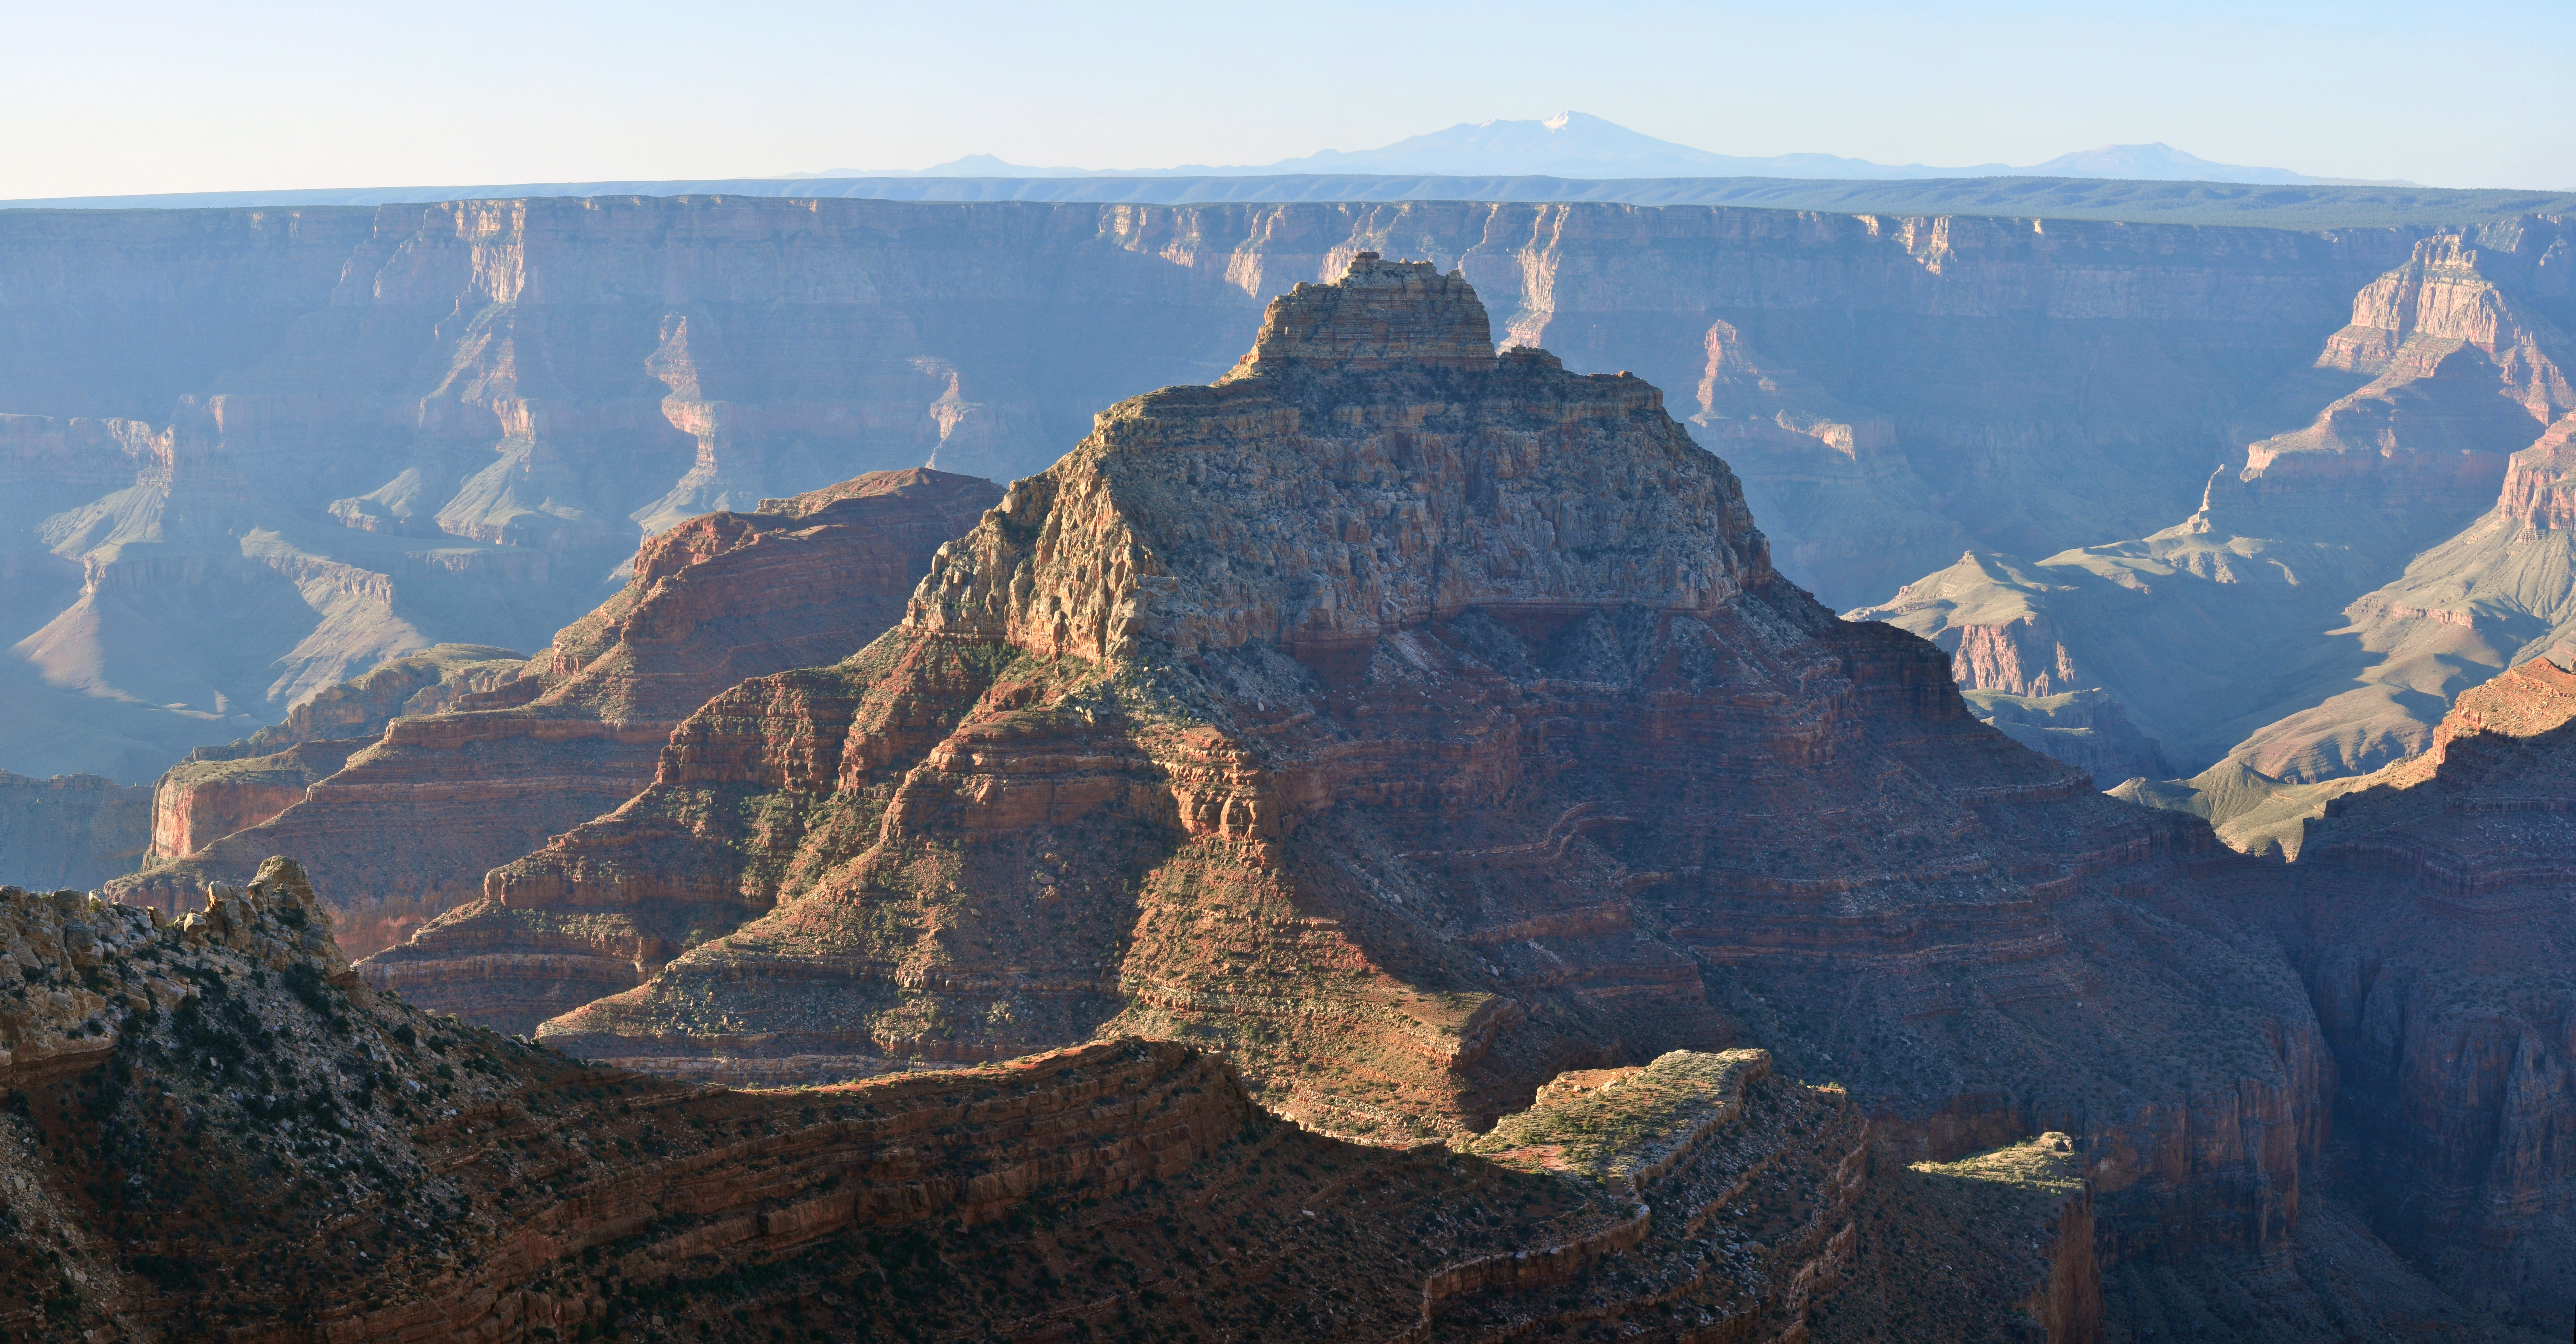 Sunrise view of the canyon from the North Rim of the canyon with mountains visible in the distance.